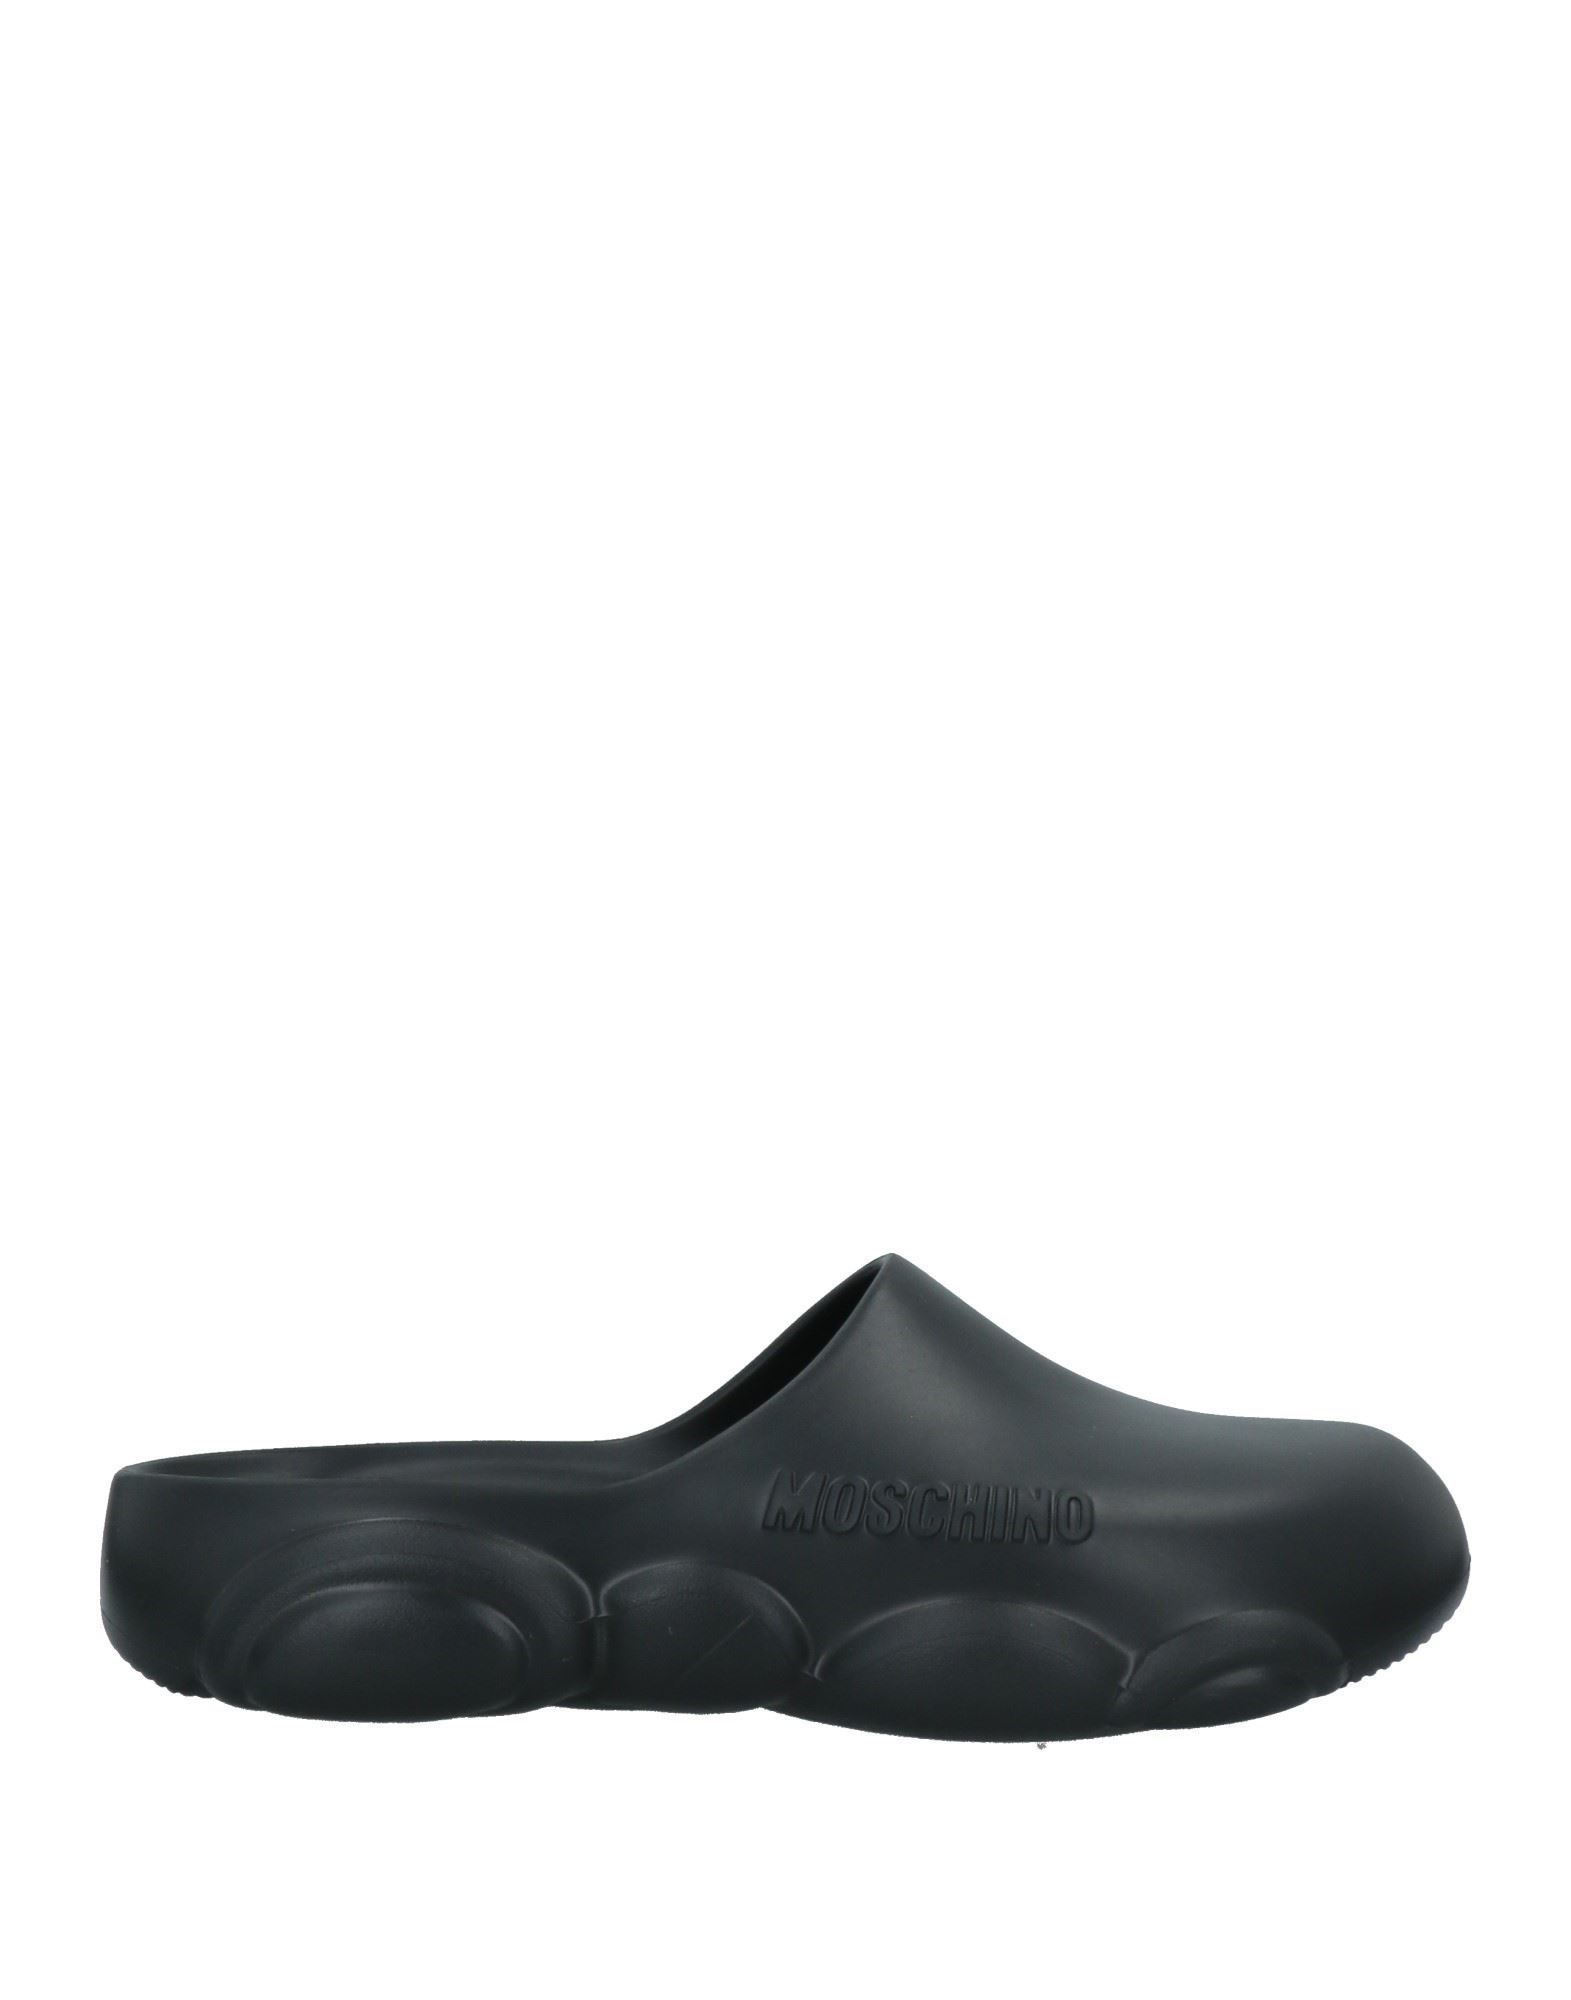 Shop Moschino Man Mules & Clogs Black Size 8-9 Rubber